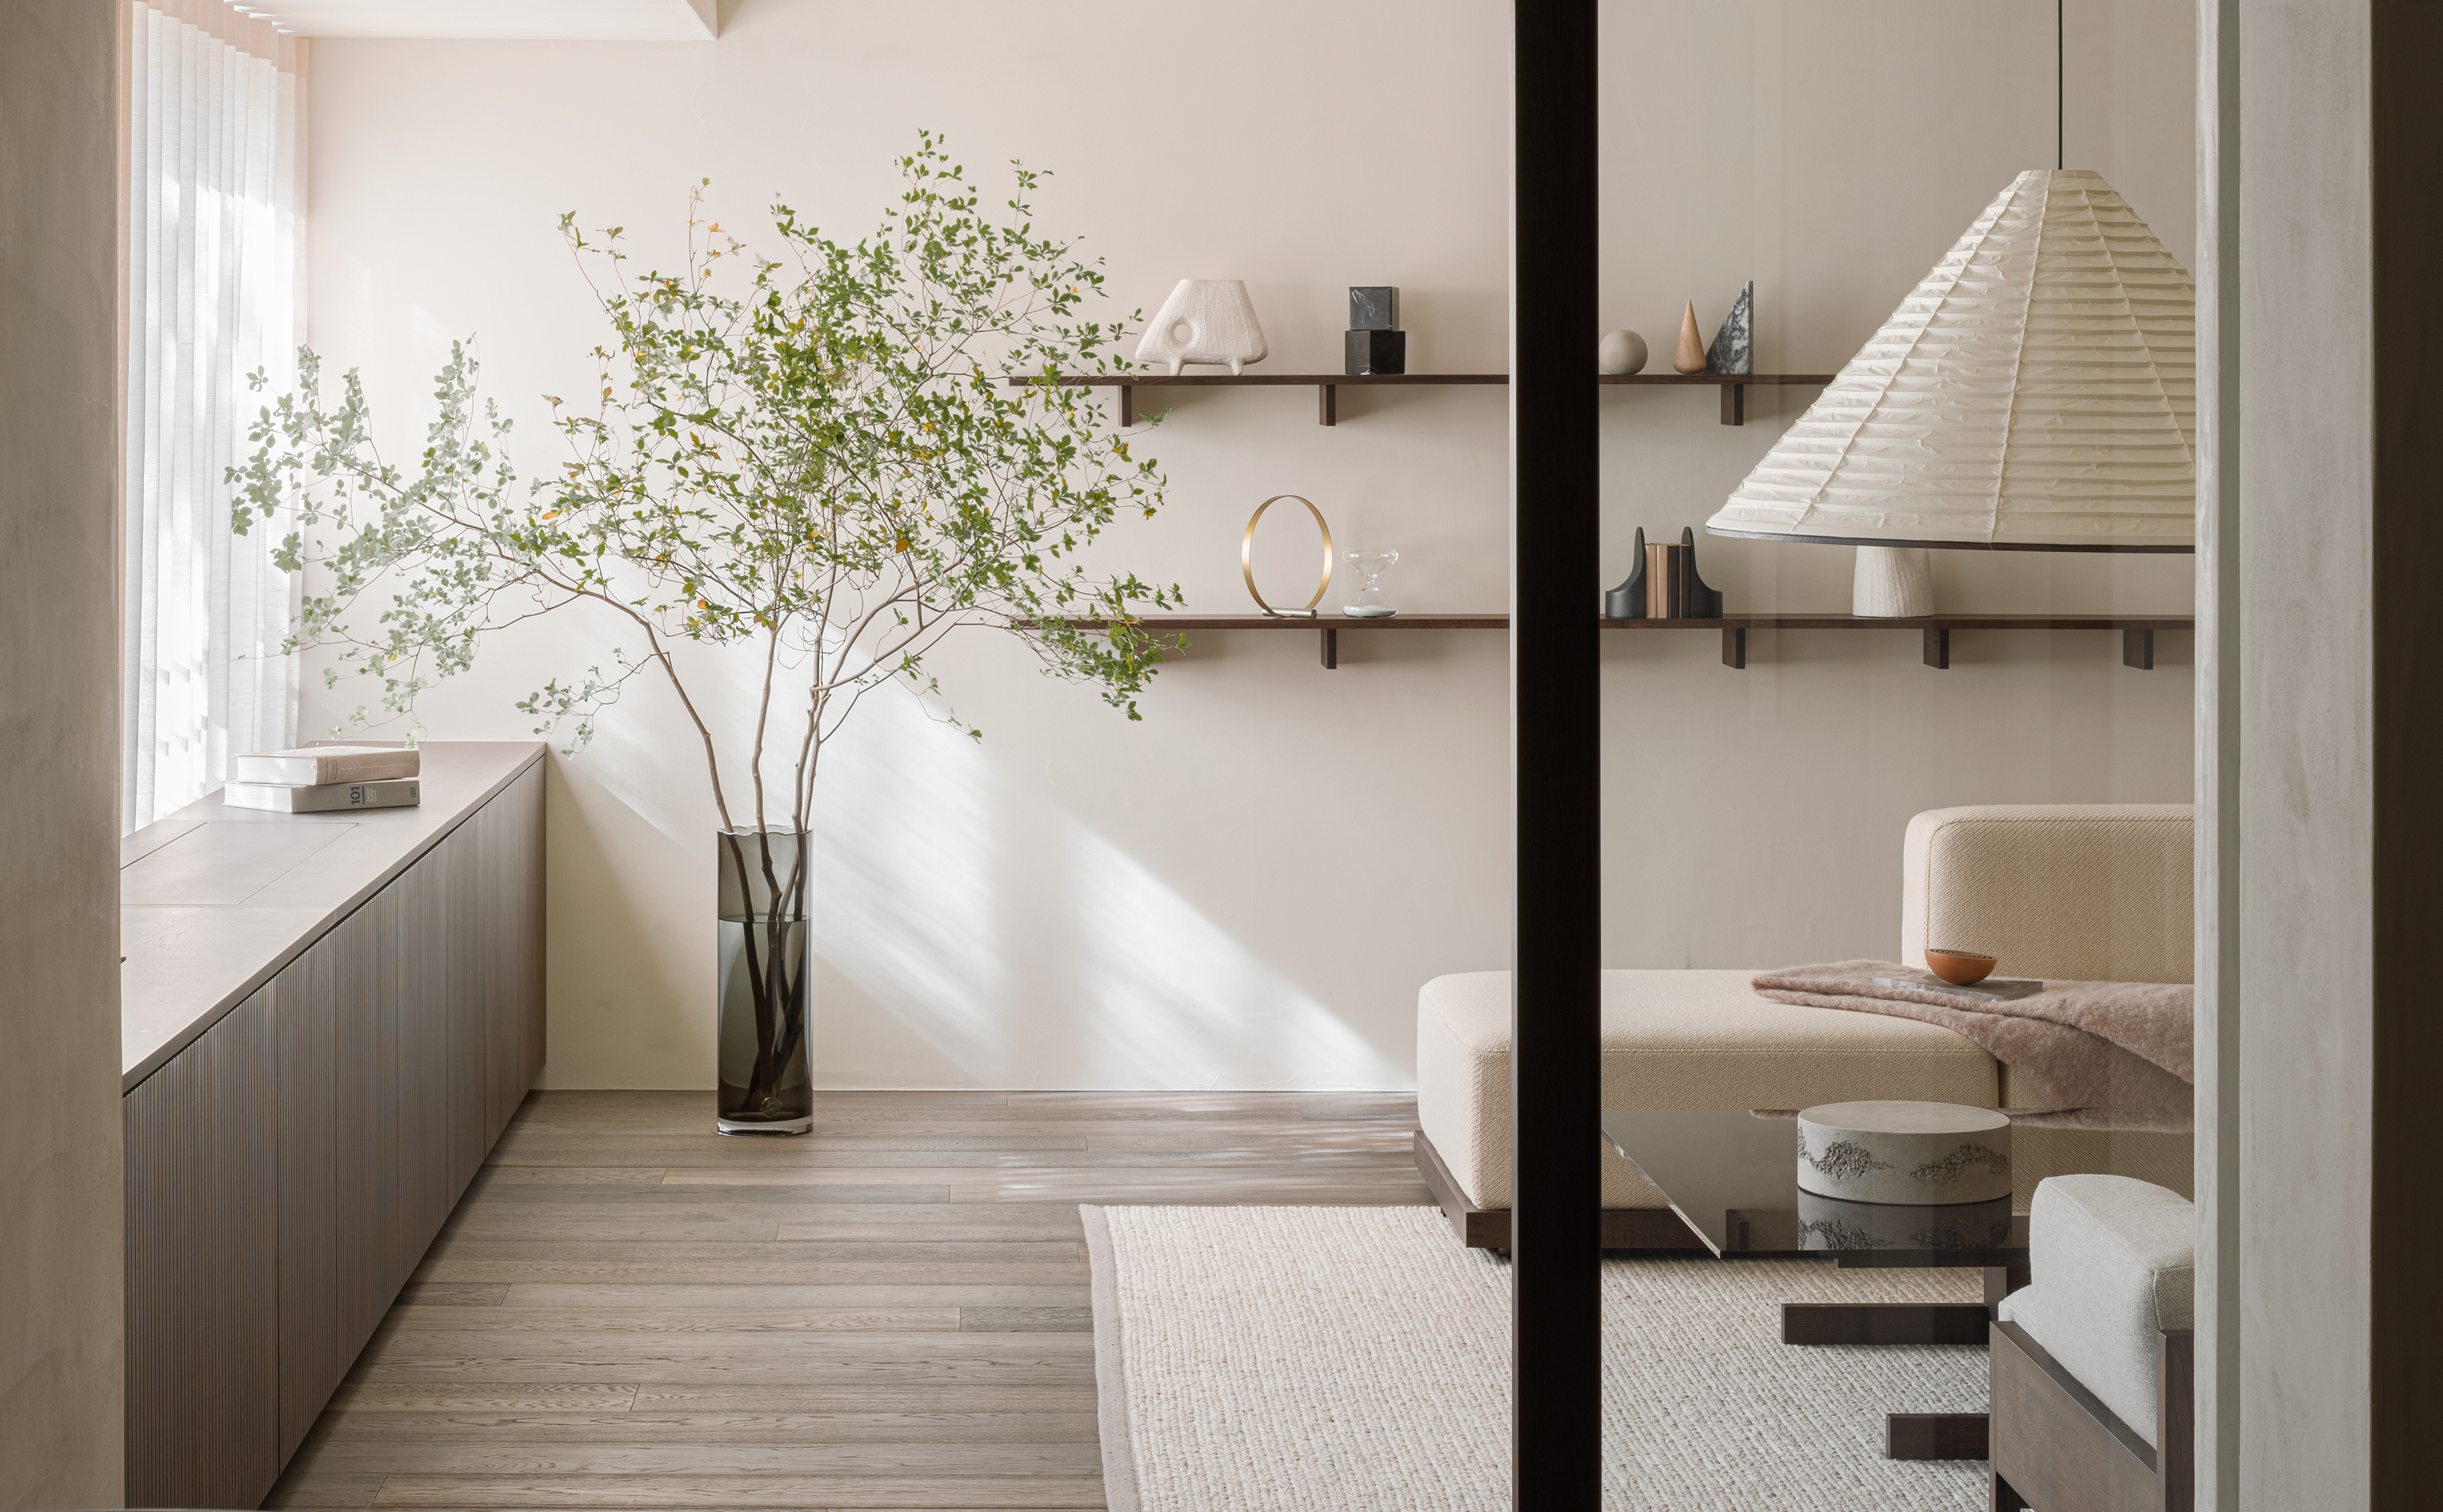 Japandi” Style Is The Minimalist, Multi-Cultural Interior Design Trend That  Shows No Sign of Stopping